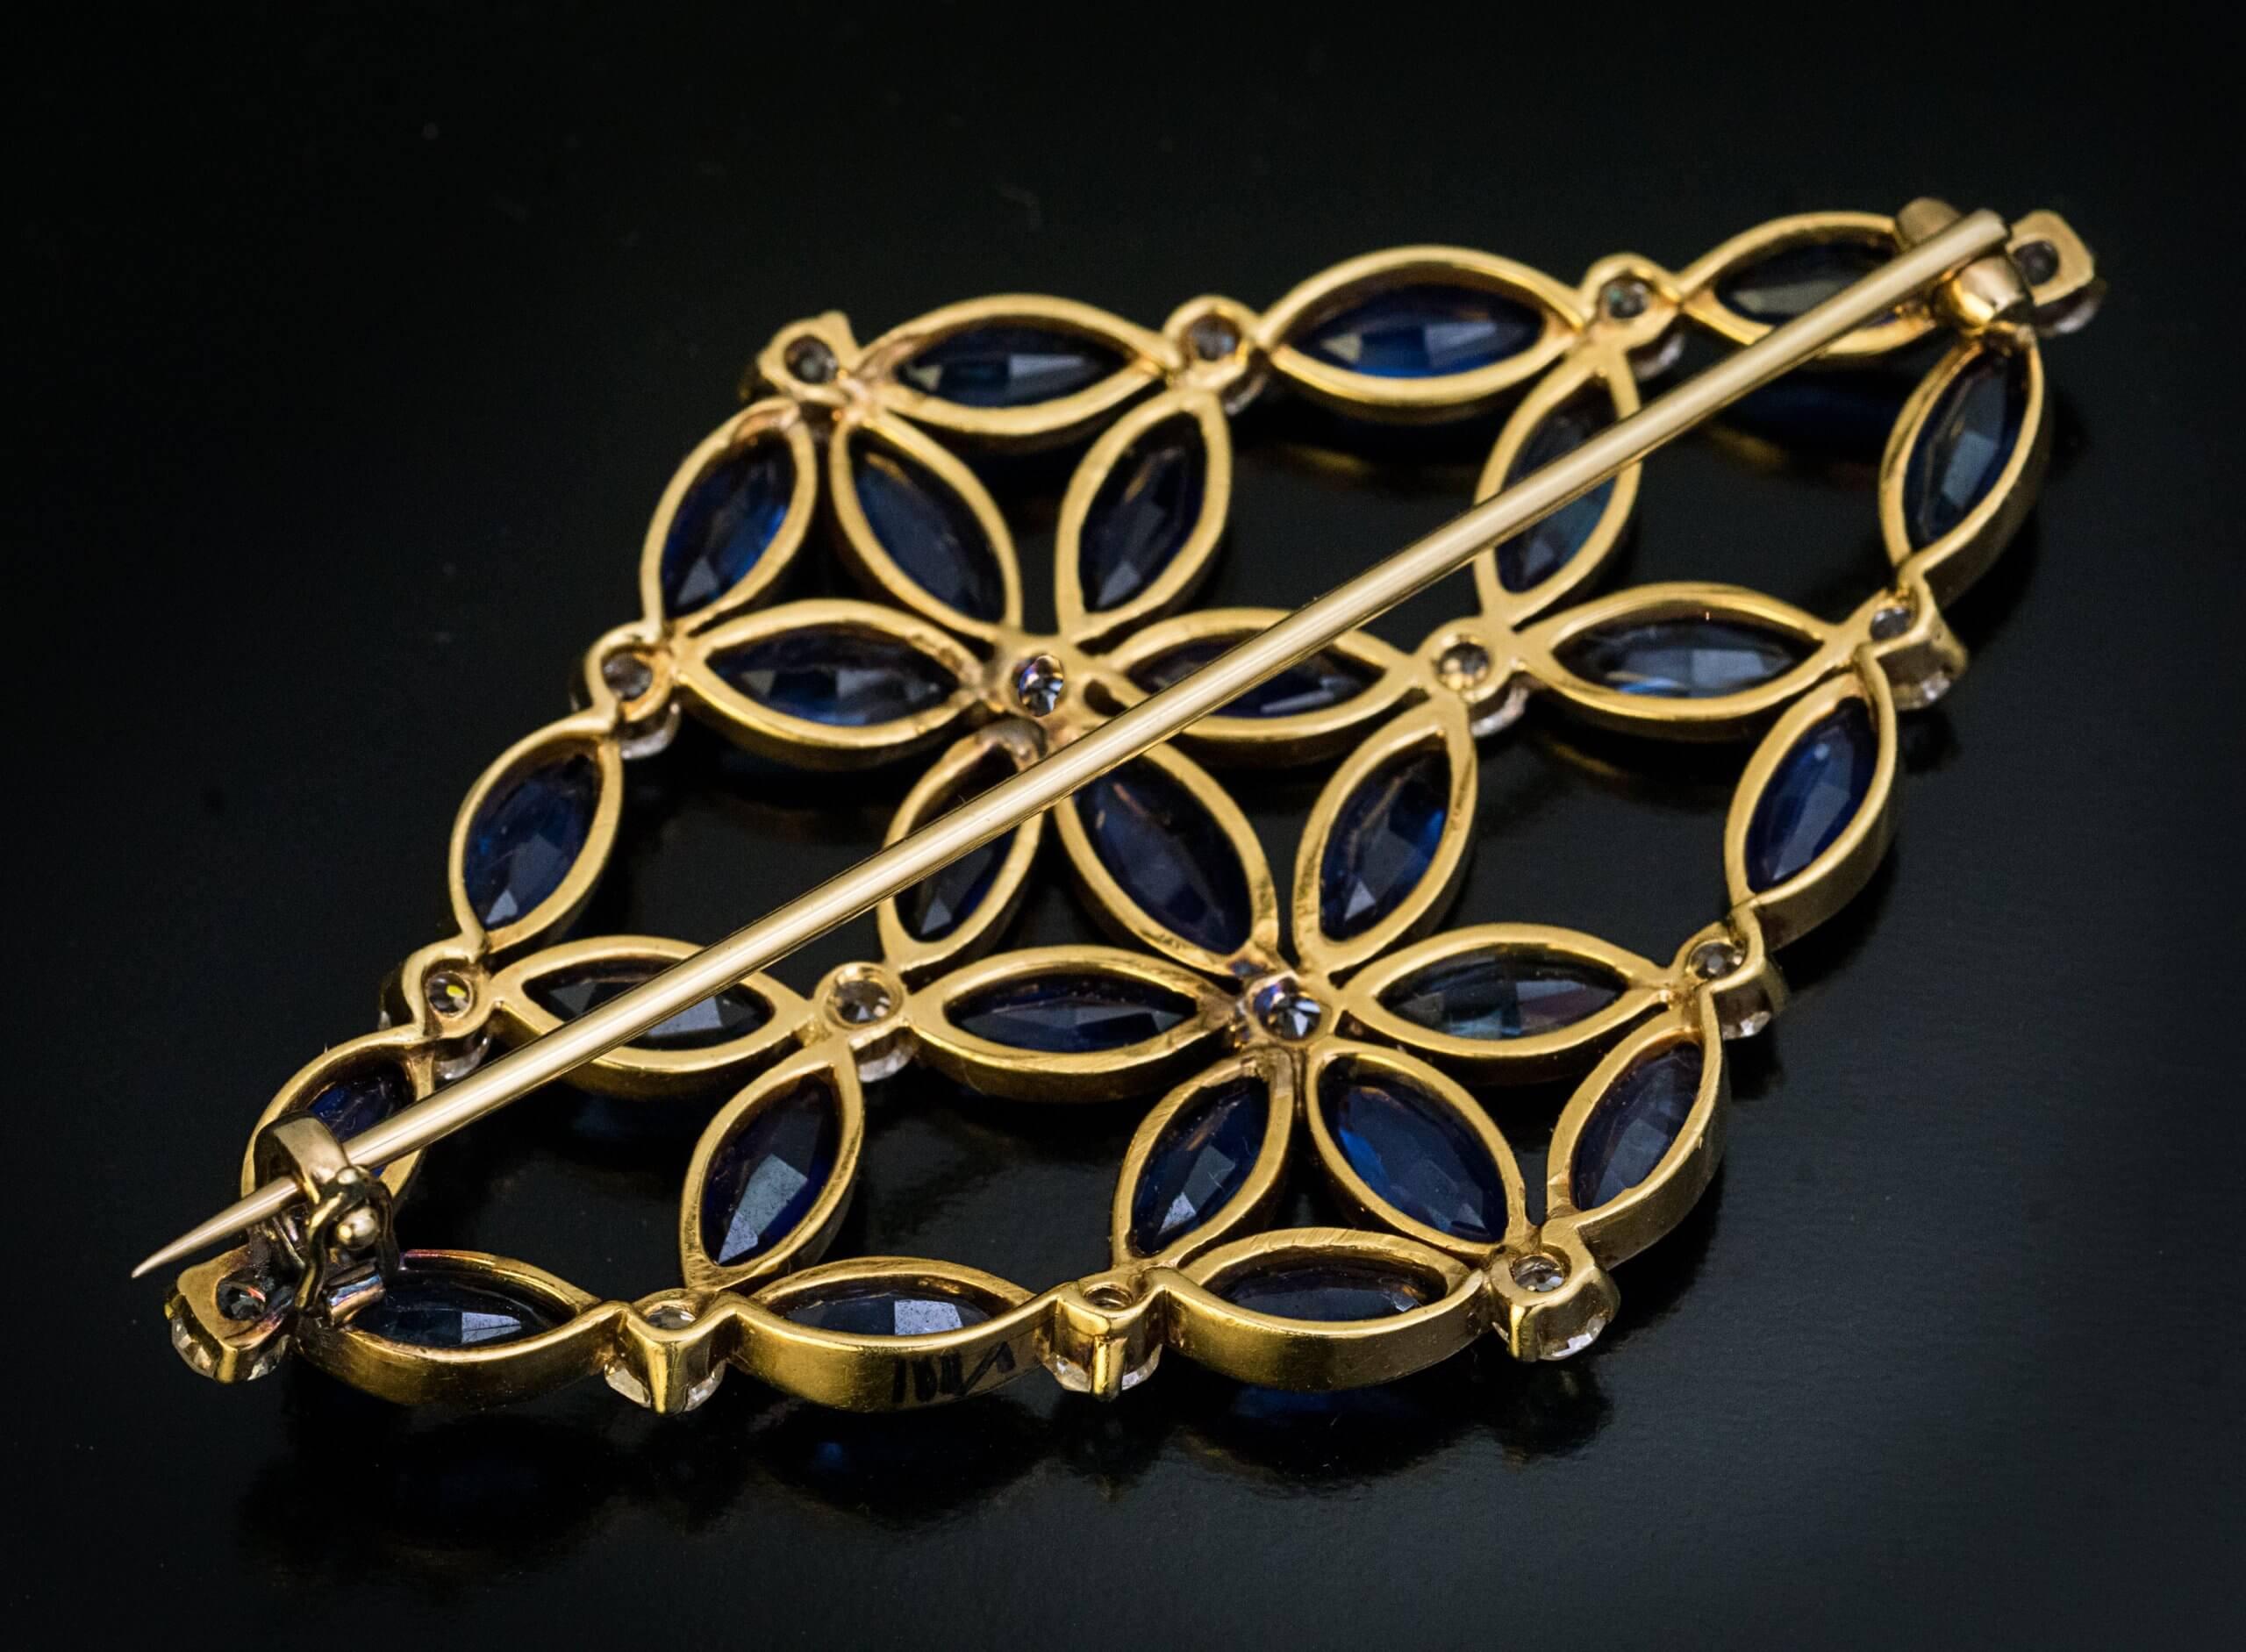 Circa 1910s  This one of a kind floral motif late Art Nouveau / early Art Deco era brooch is superbly modeled and finely crafted in 18K yellow gold. The brooch is set with twenty seven marquise cut blue sapphires and sixteen old brilliant cut